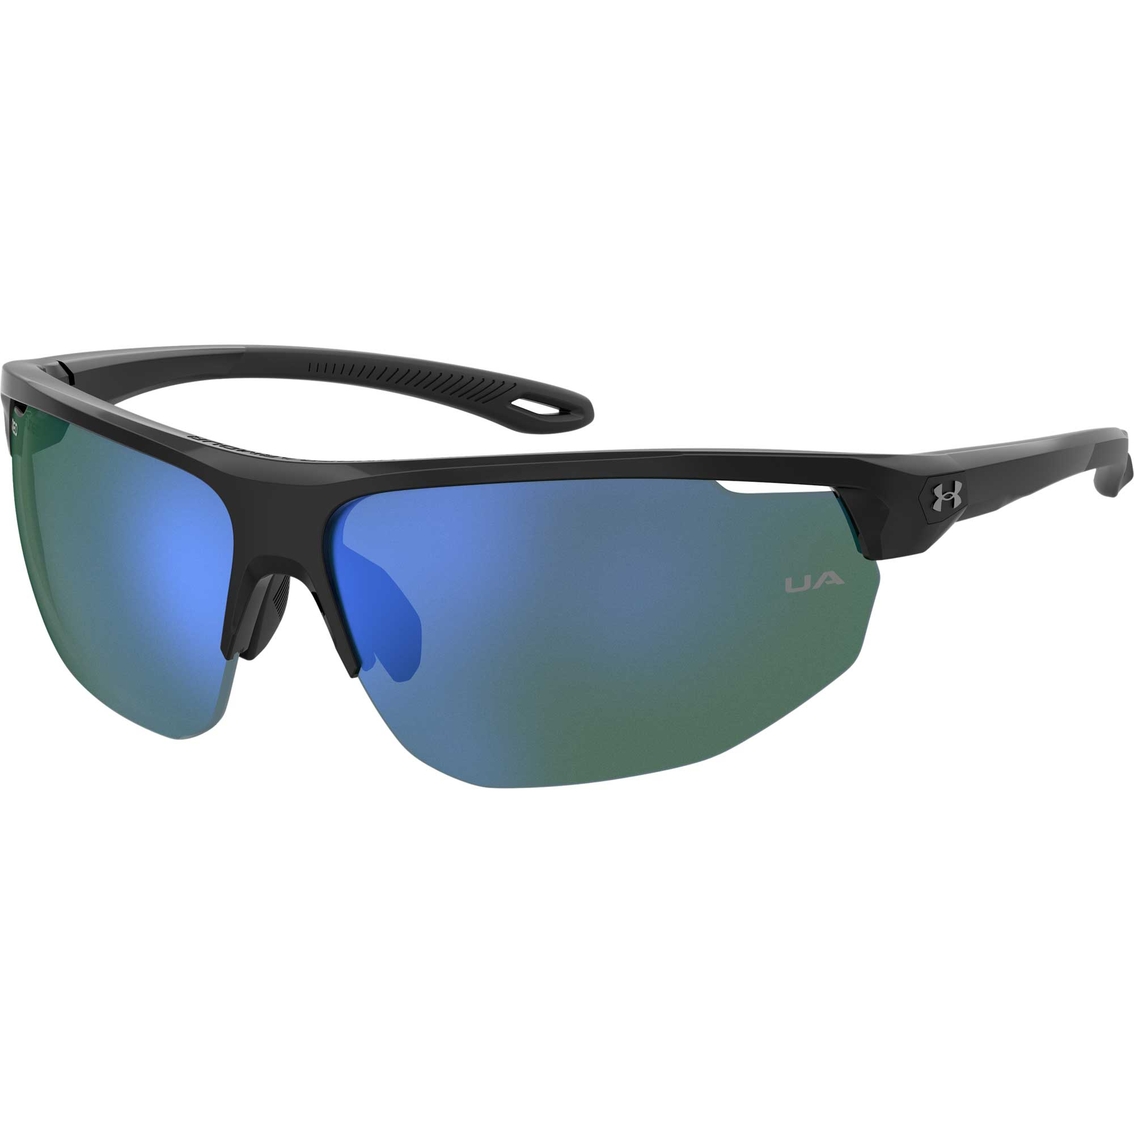 Under Armour Sunglasses 0002GS - Image 1 of 3